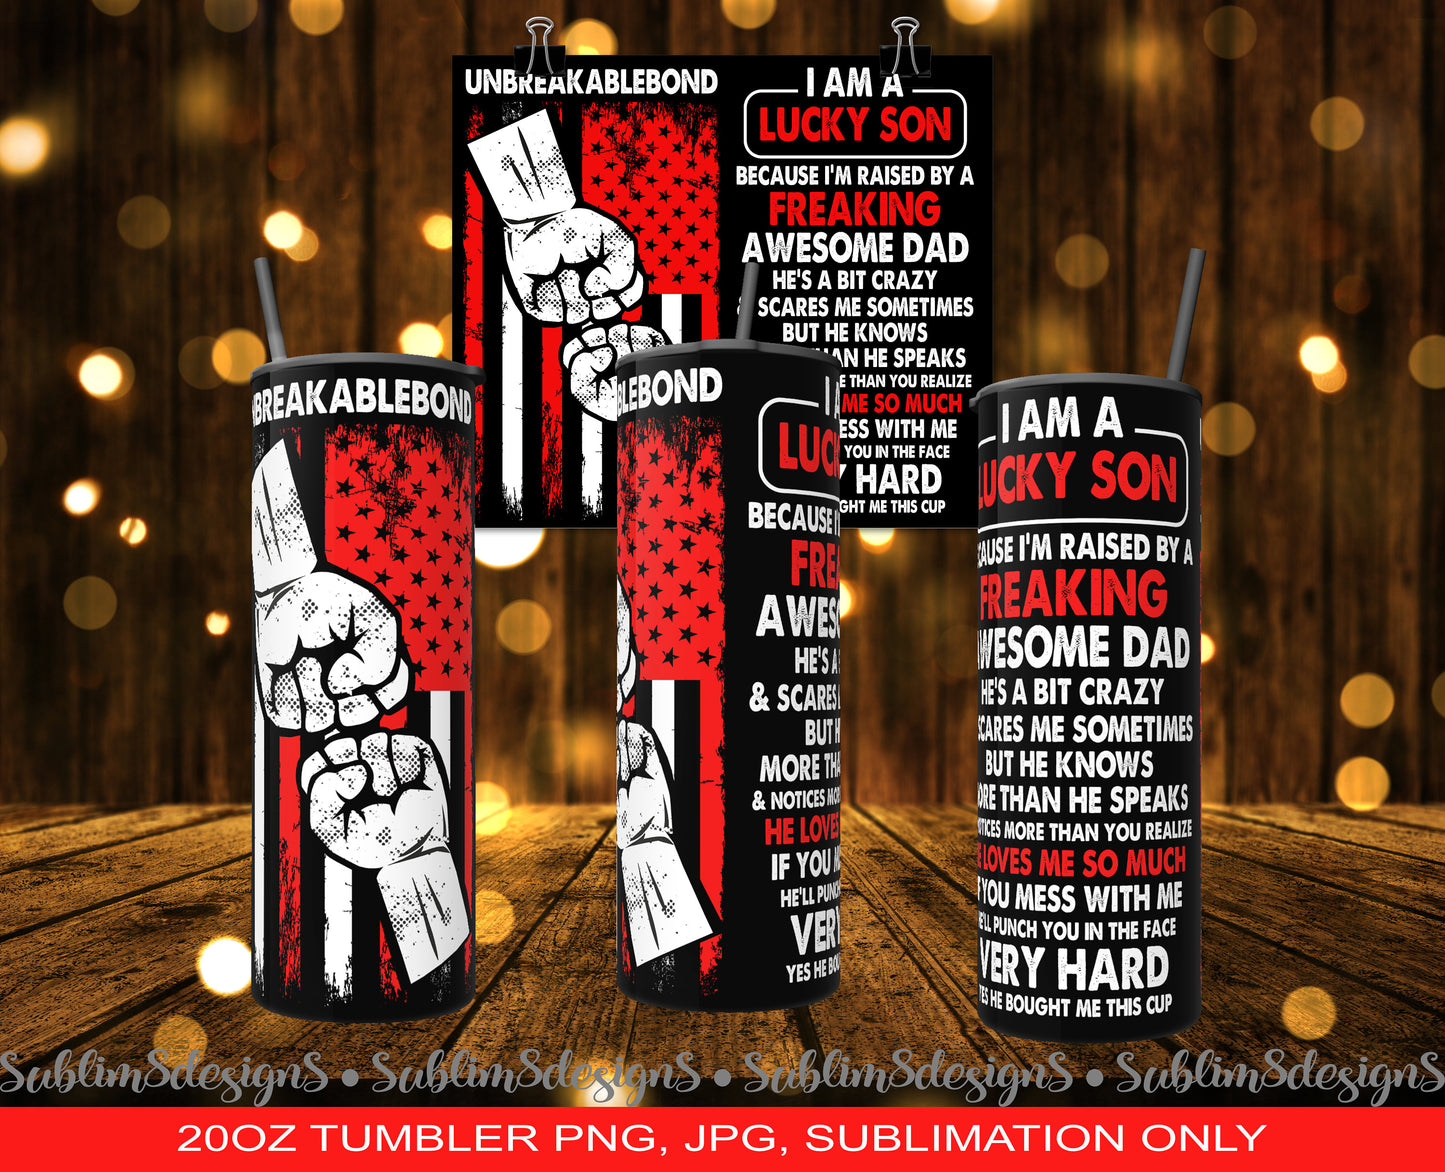 I Am A Lucky Son - Father's Day Gift - Perfect for the ultimate Daddy's boy! - Red 20oz Tumbler Design PNG and JPG ONLY